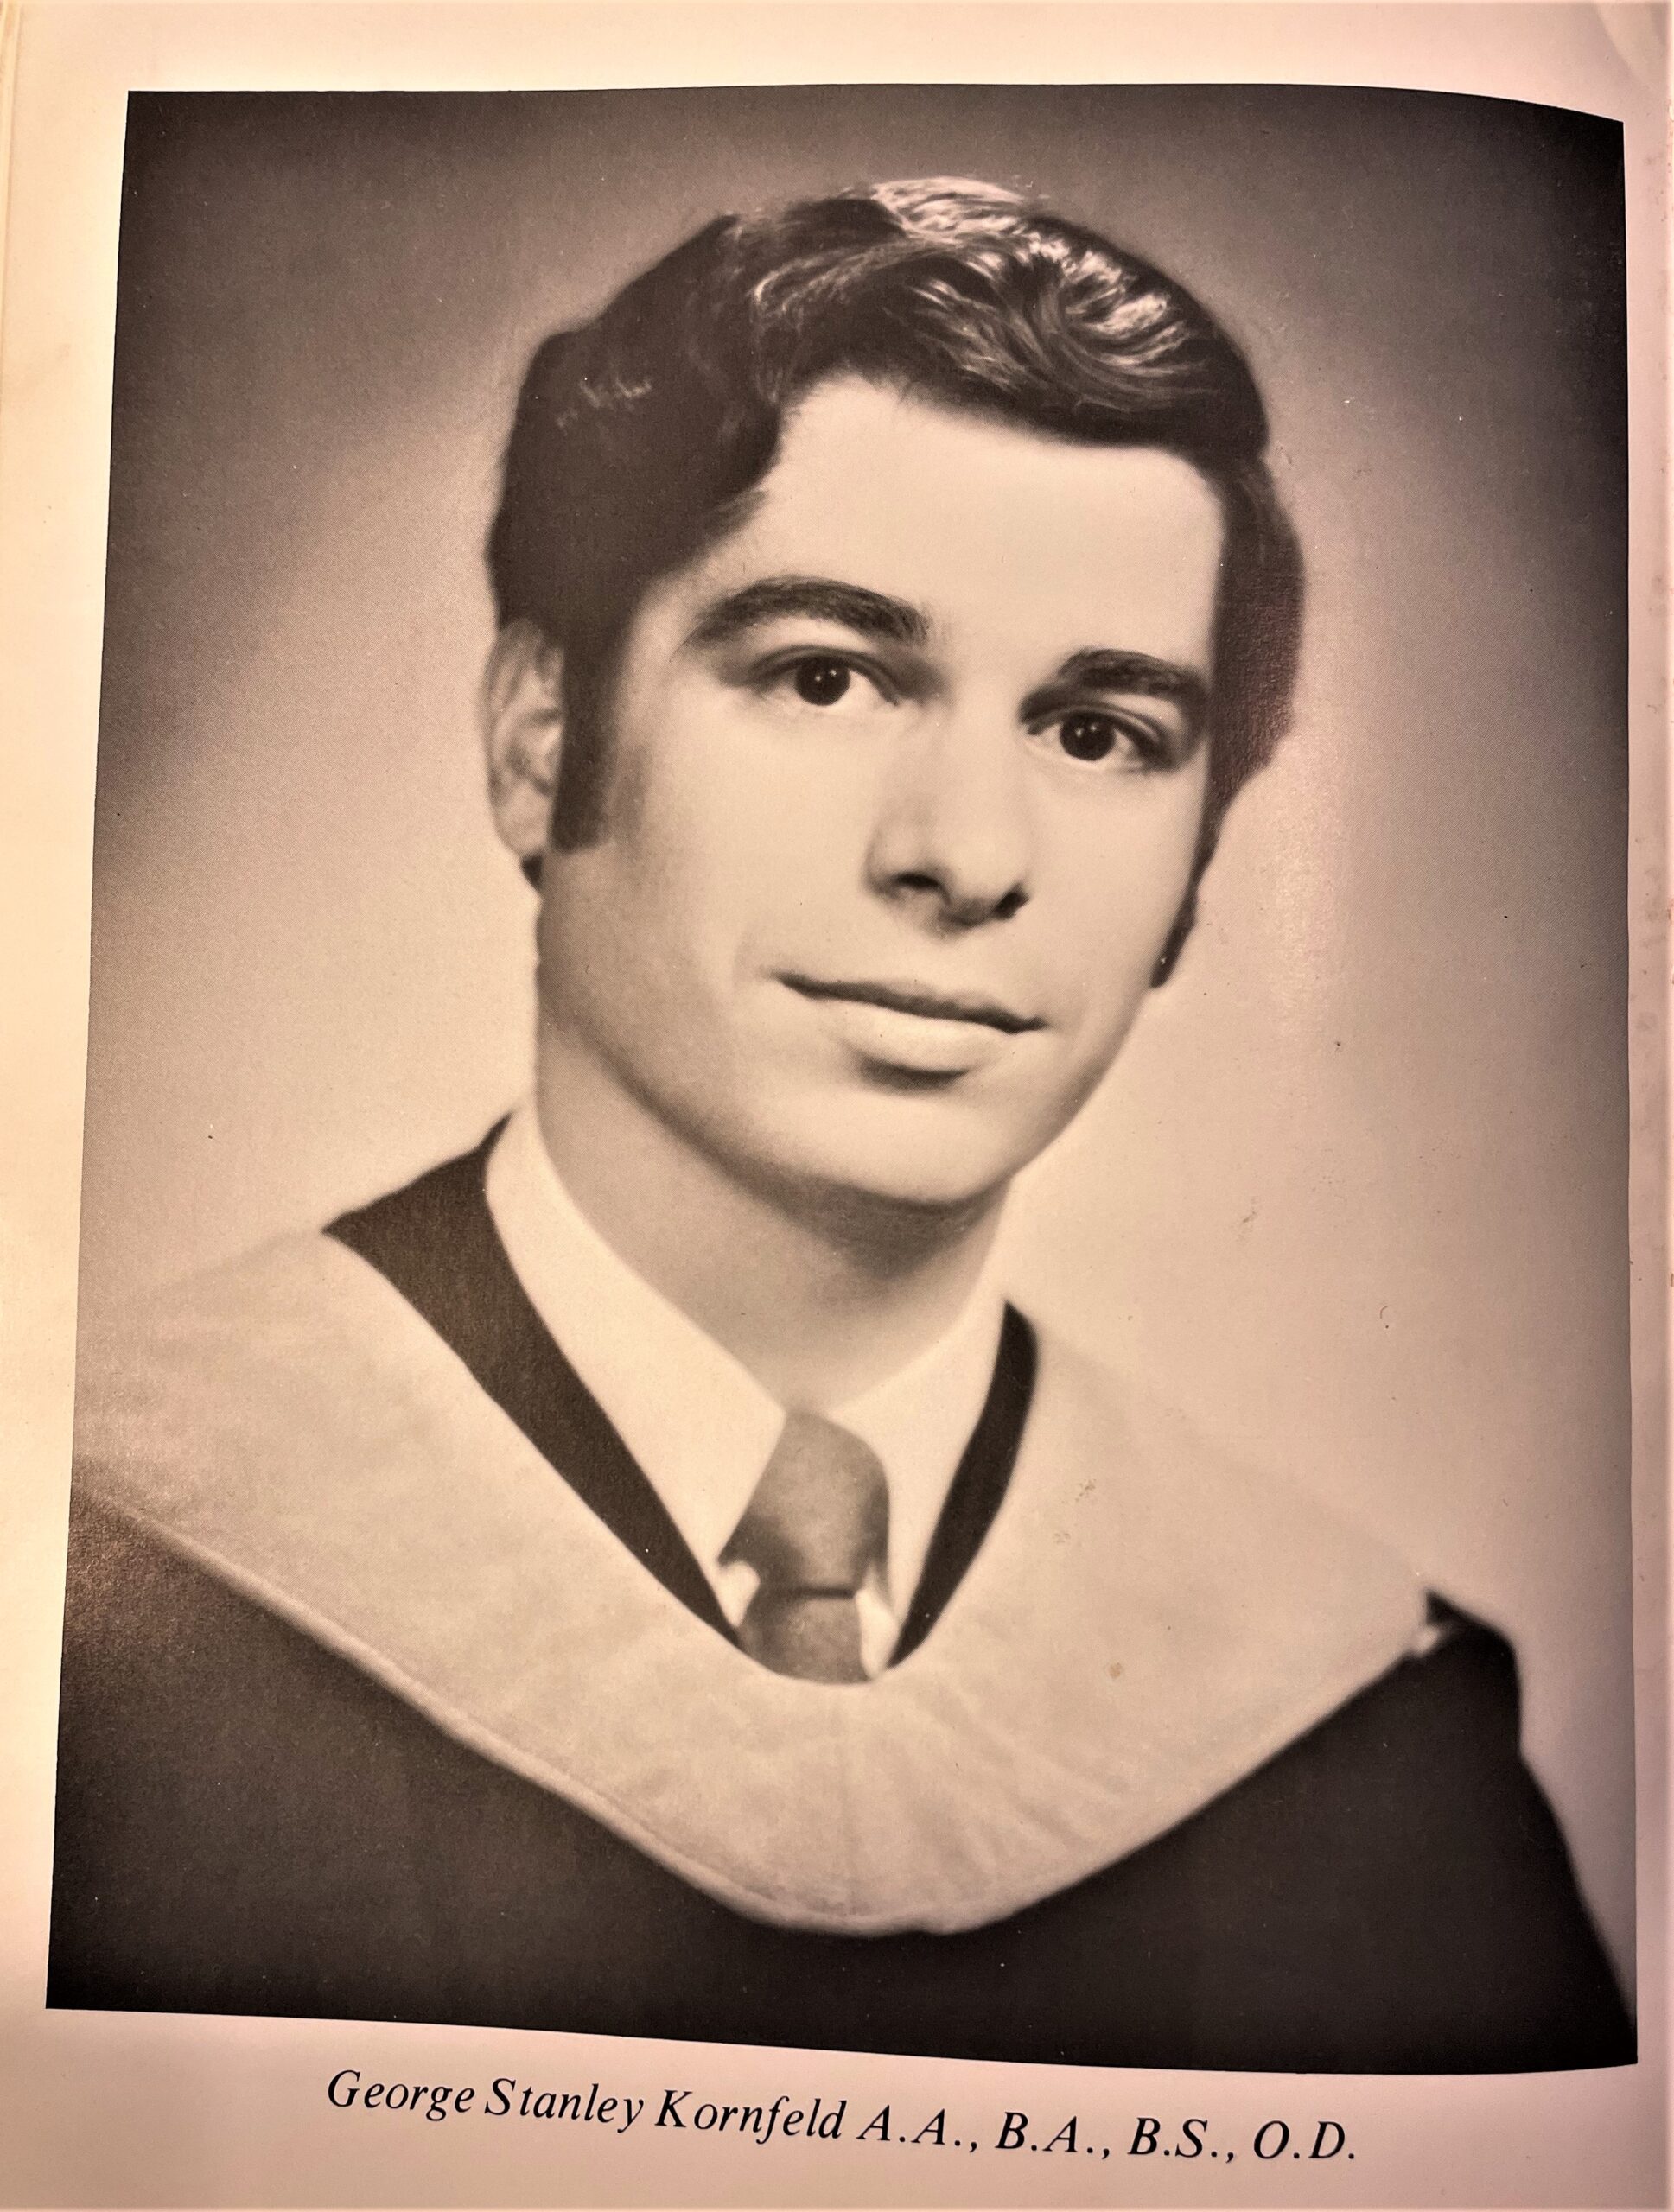 A sepia toned yearbook photo of a young man